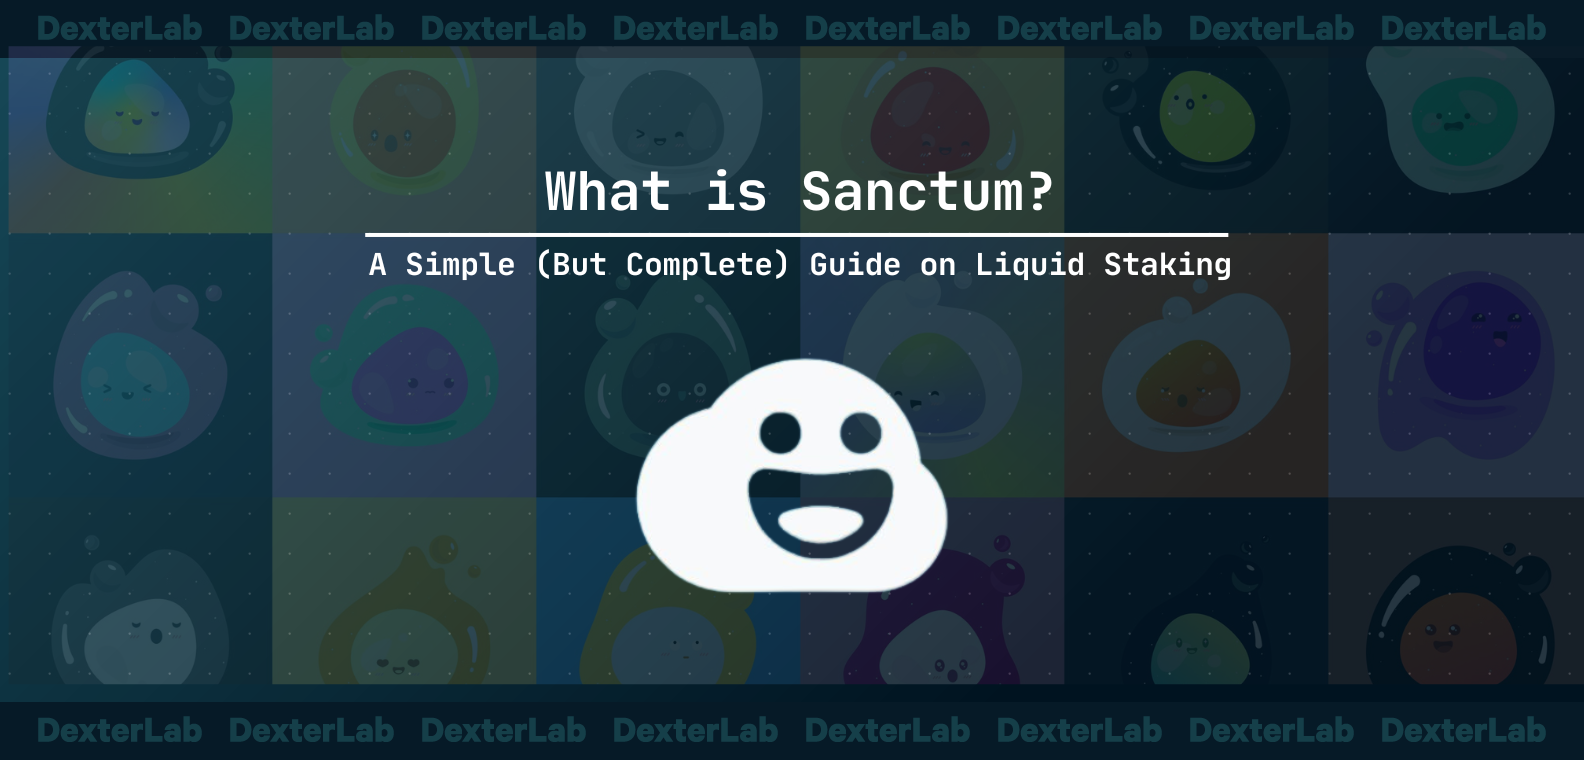 What is Sanctum? A Simple (But Complete) Guide on Liquid Staking